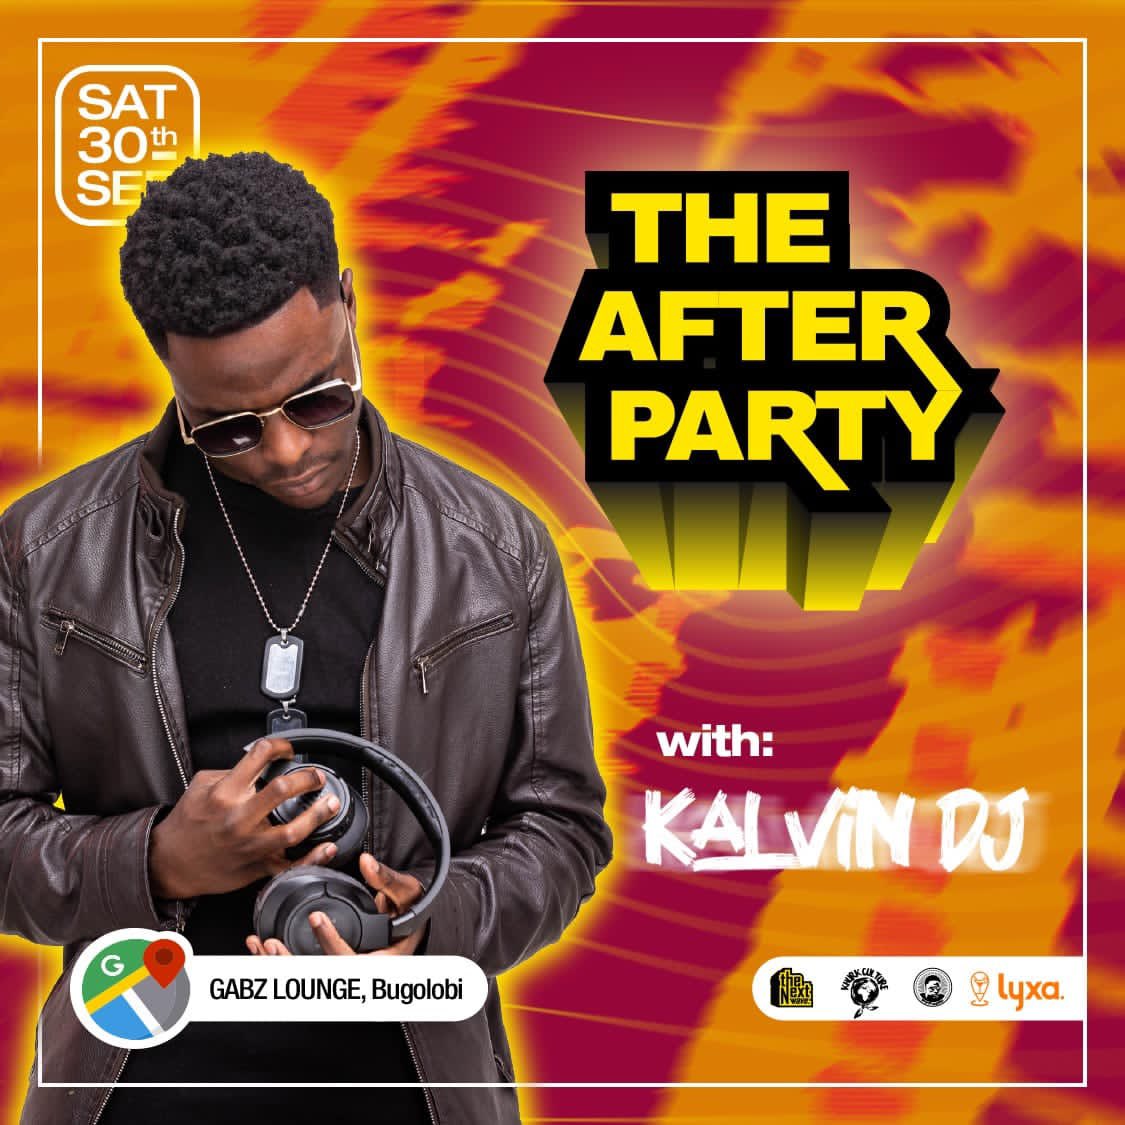 Music Policy is Set to be everlasting vibes this Saturday! 🔥🔥🔥

#theafterparty